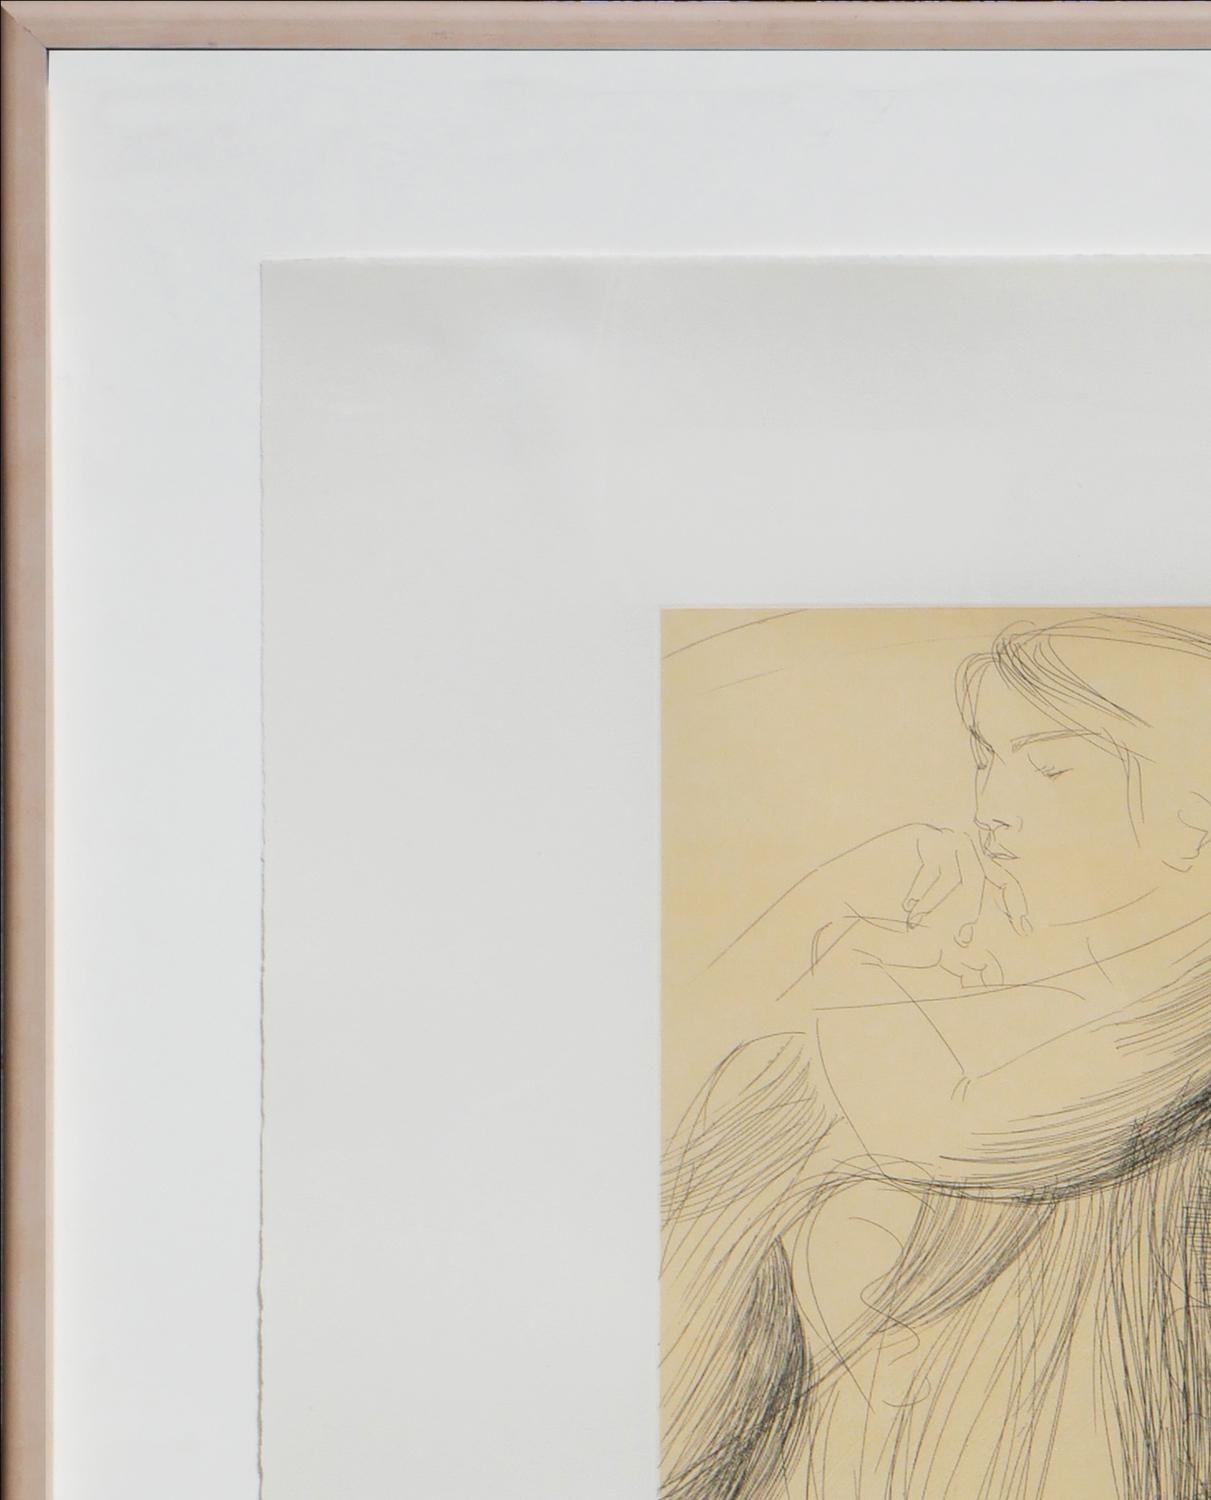 Monochromatic abstract figurative etching by Italian artist Emilio Greco. The piece depicts an image of two women figures on wove paper.  Signed and editioned 98/200 by the artist at the bottom. Glass framed in a natural wooden frame.

This